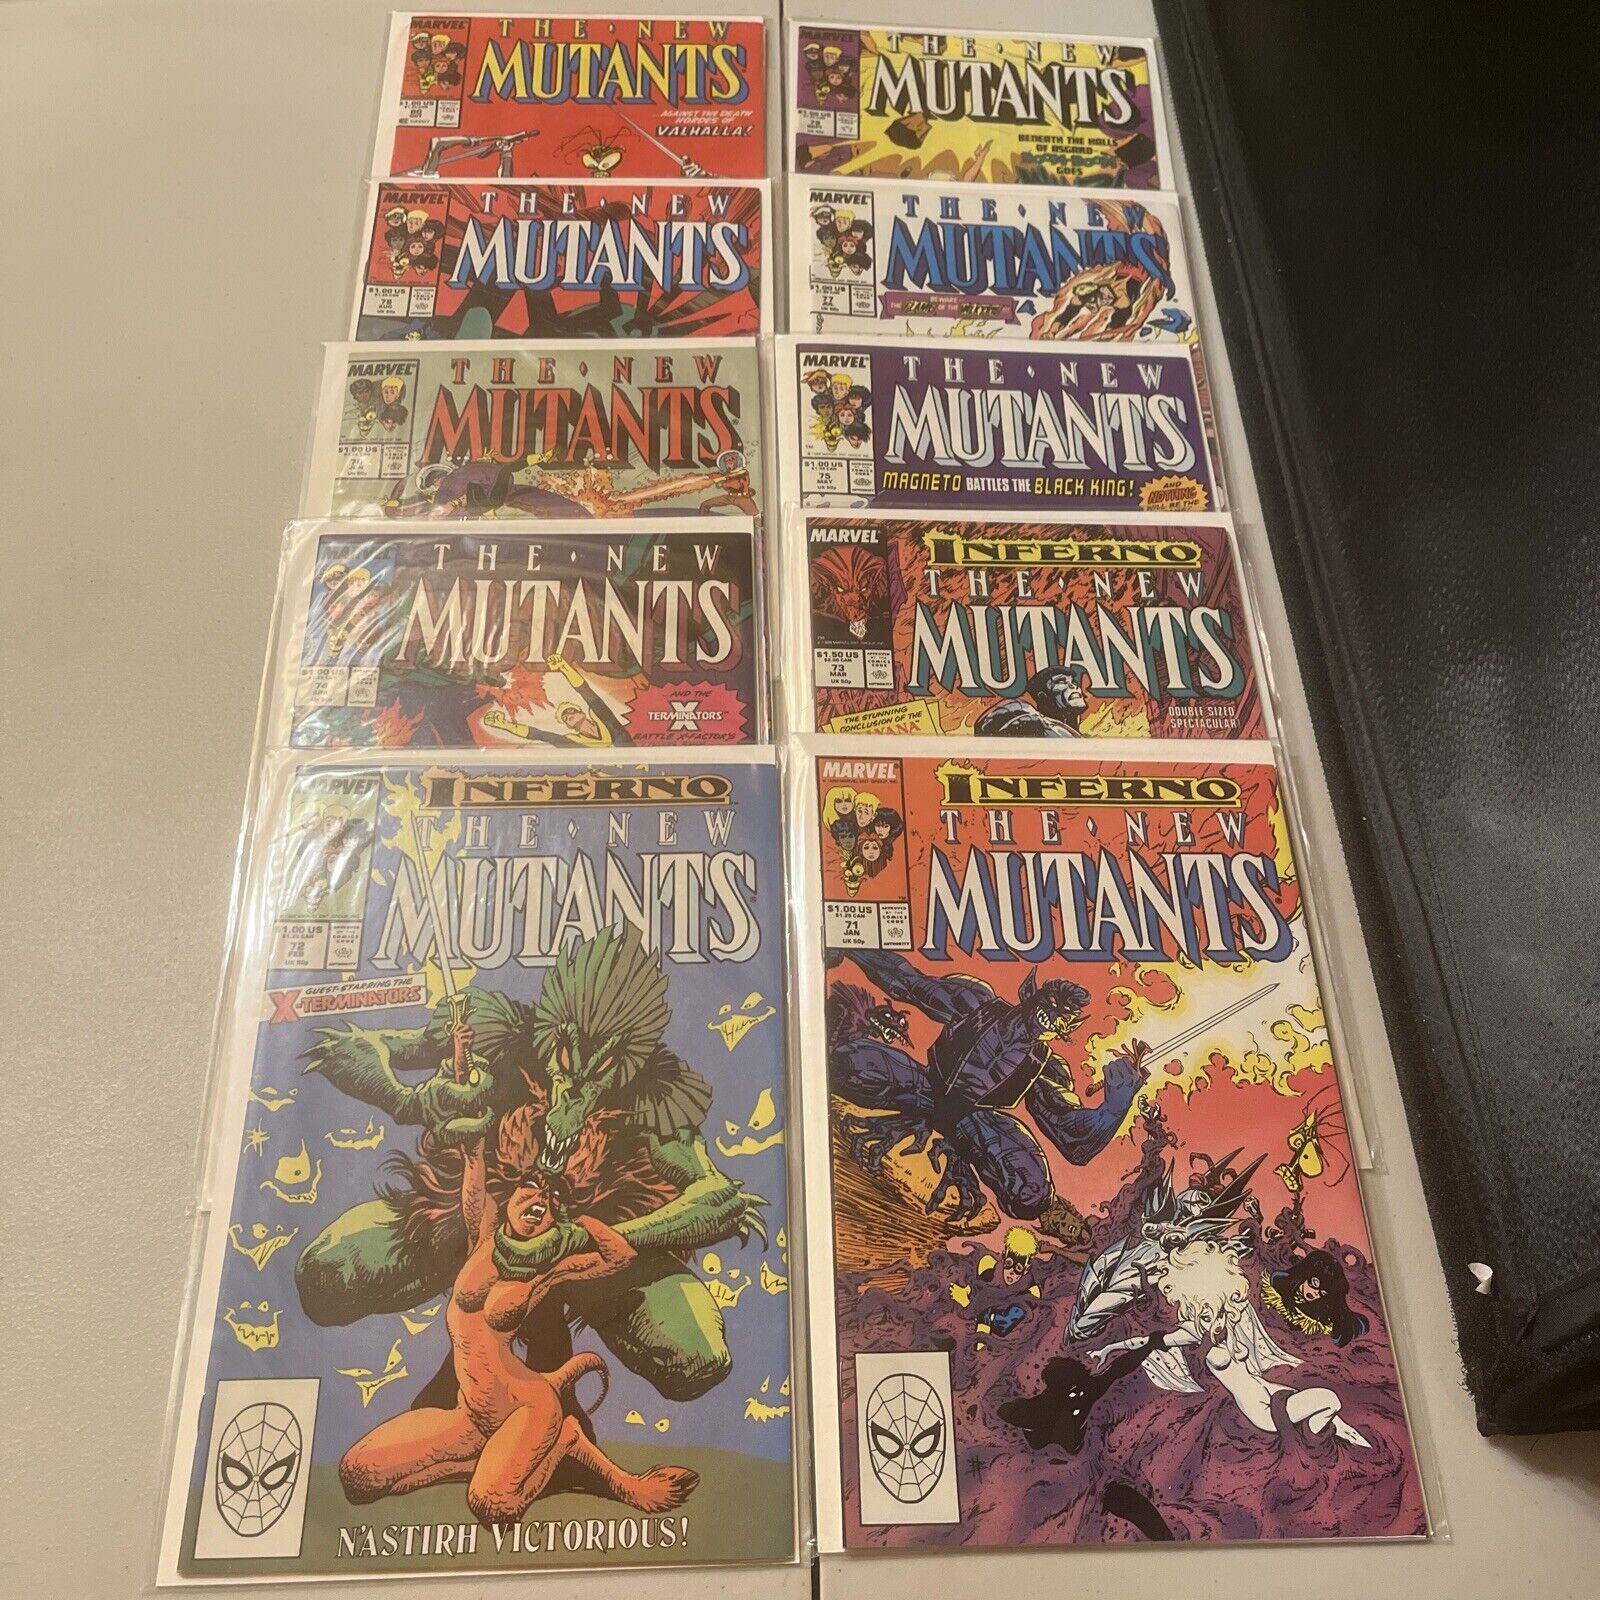 Lot of 10 1st Series 1983 Marvel New Mutants Issues #71 - #80 most VF condition